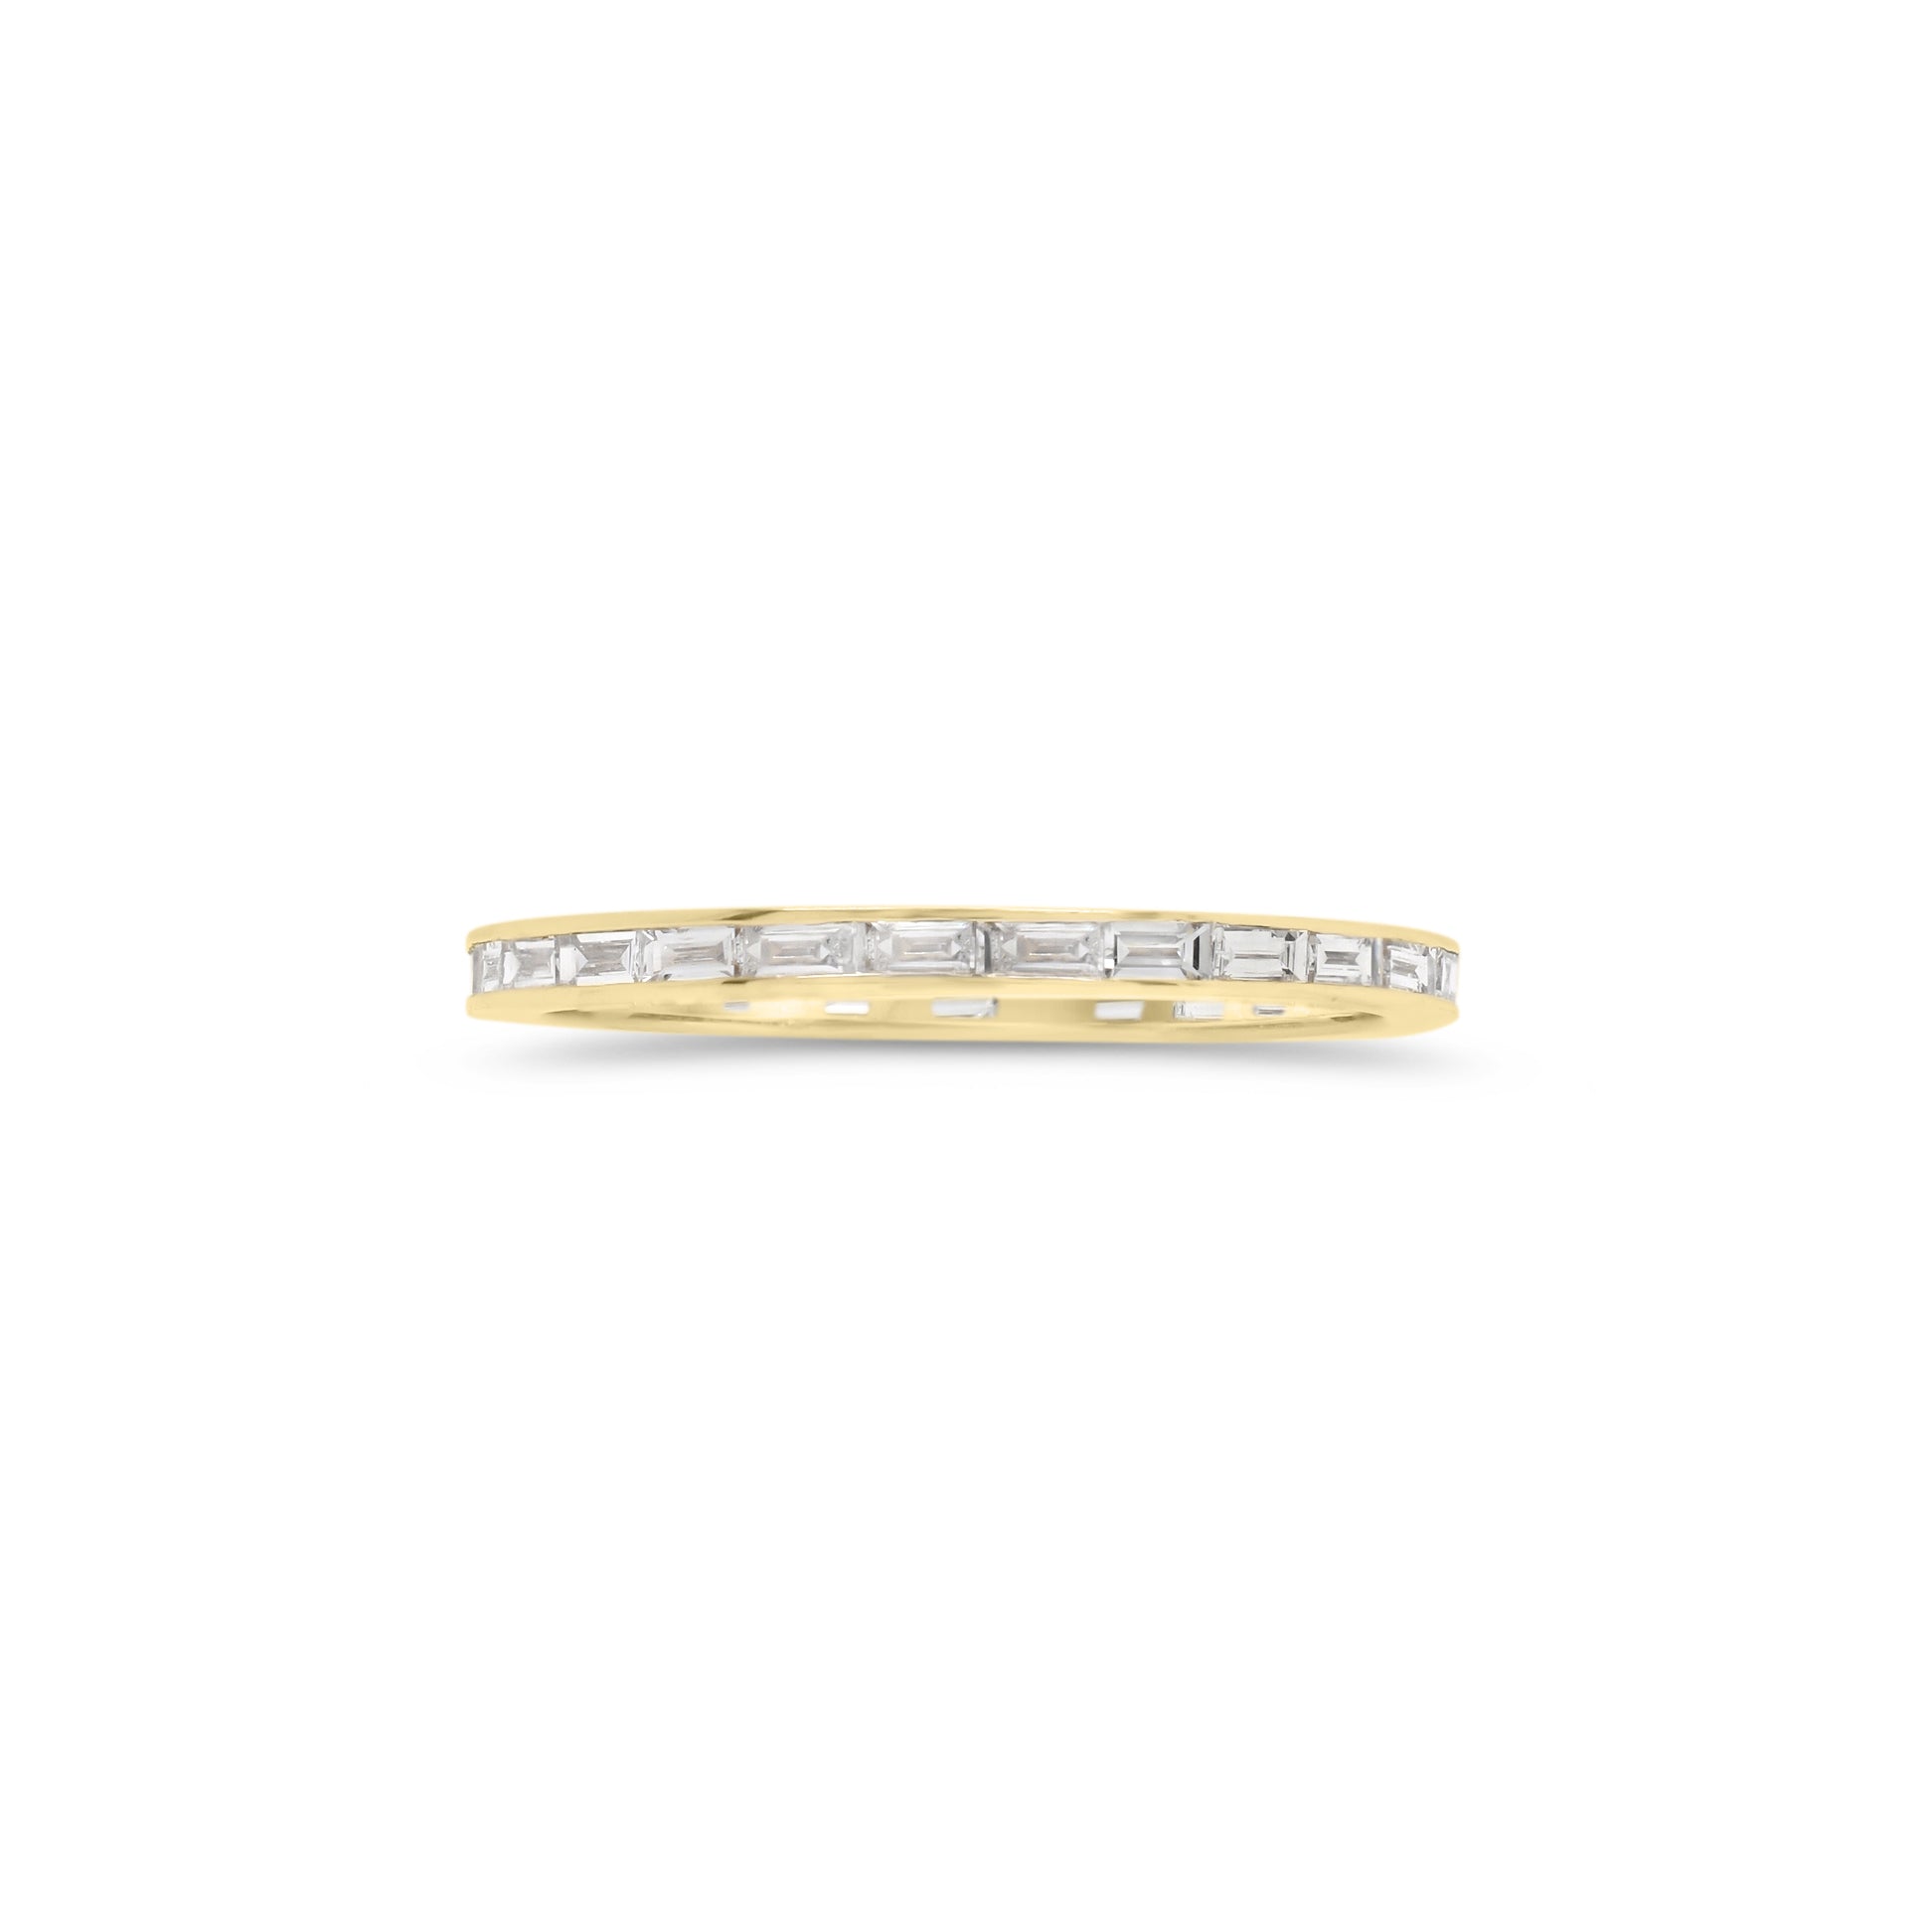 Baguette Diamond Stackable Ring - 14K gold weighing 0.95 grams  - 27 slim baguettes totaling 0.45 carats